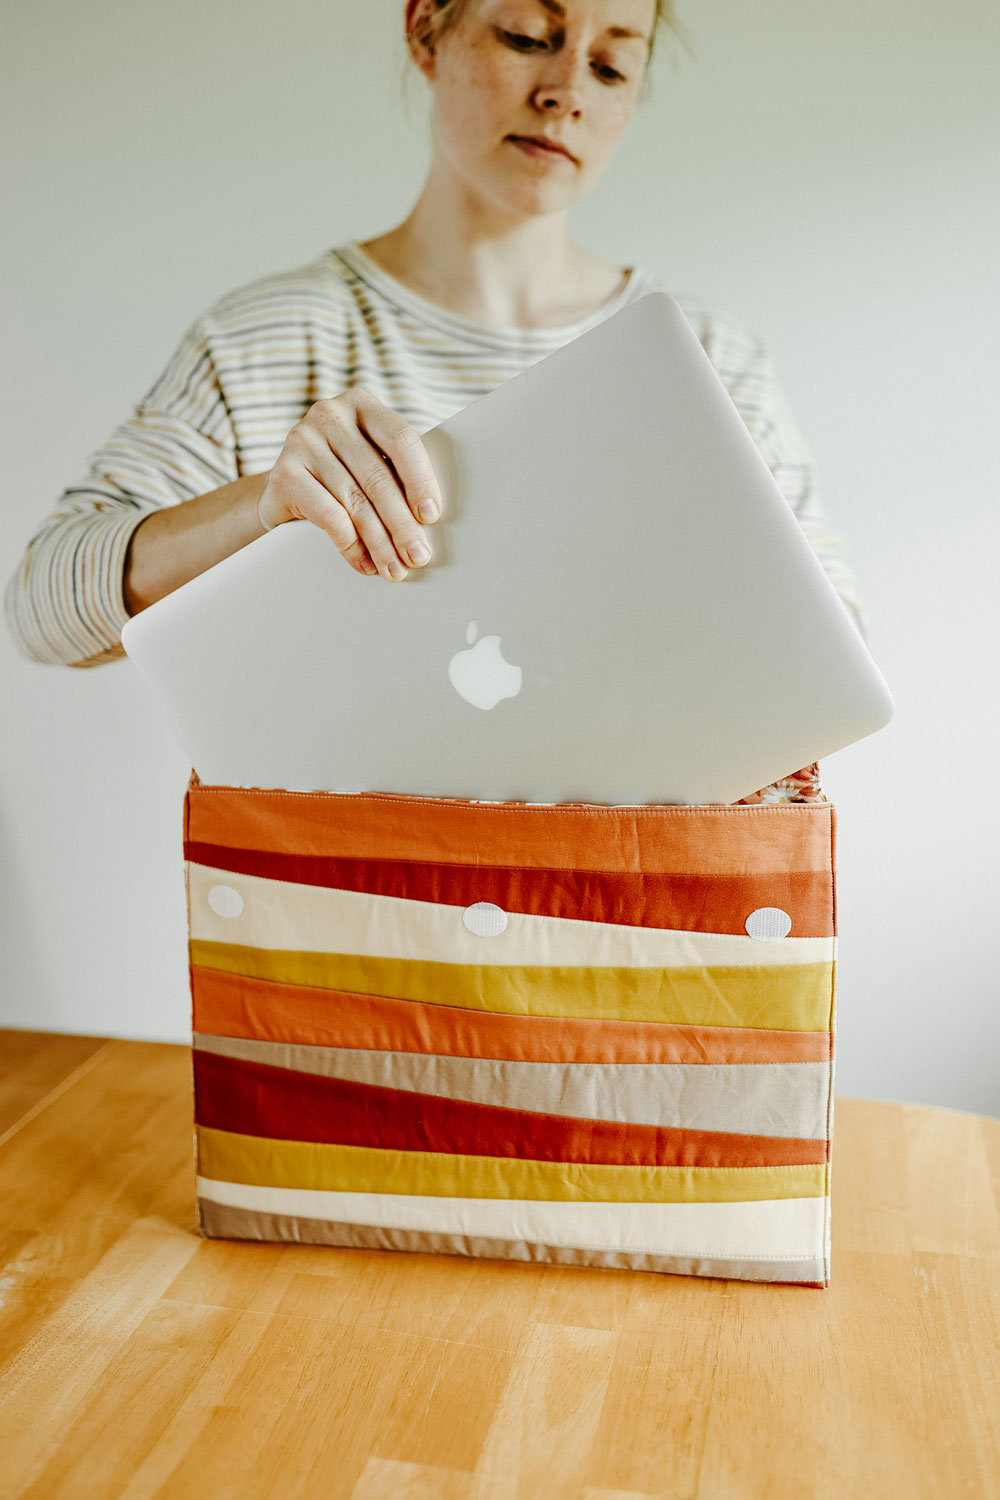 Learn to sew a beginner-friendly quilted laptop case in this tutorial featuring the Shine quilt block by Suzy Quilts. suzyquilts.com #sewingdiy #quilting